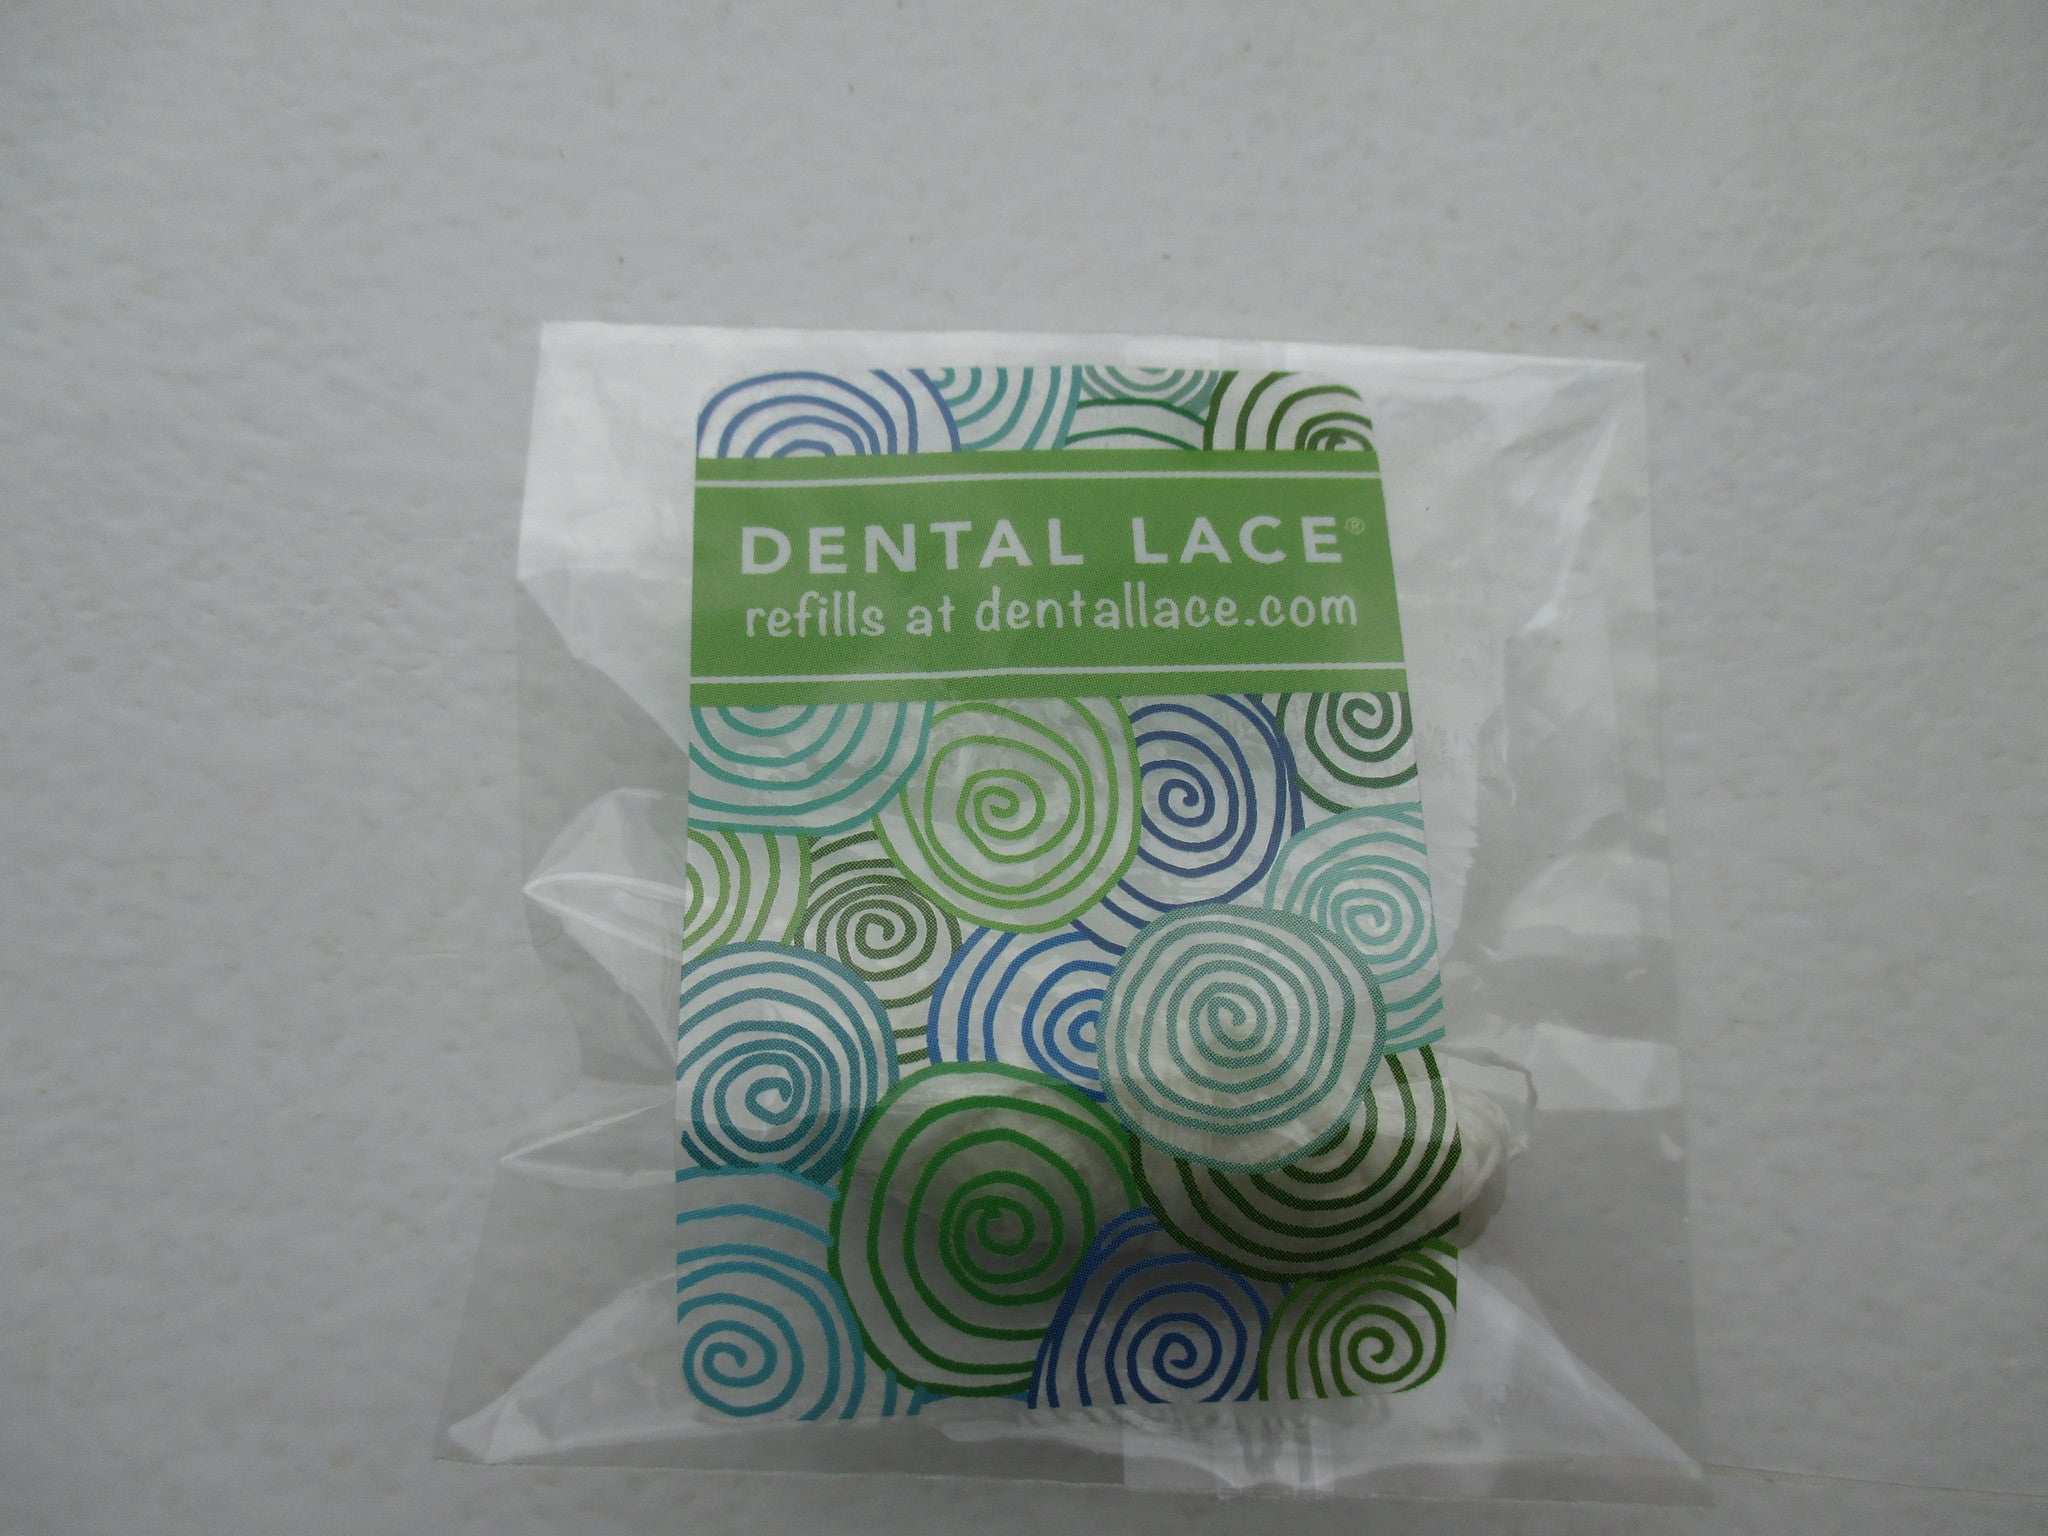 Dental Lace Now Using Compostable Bags